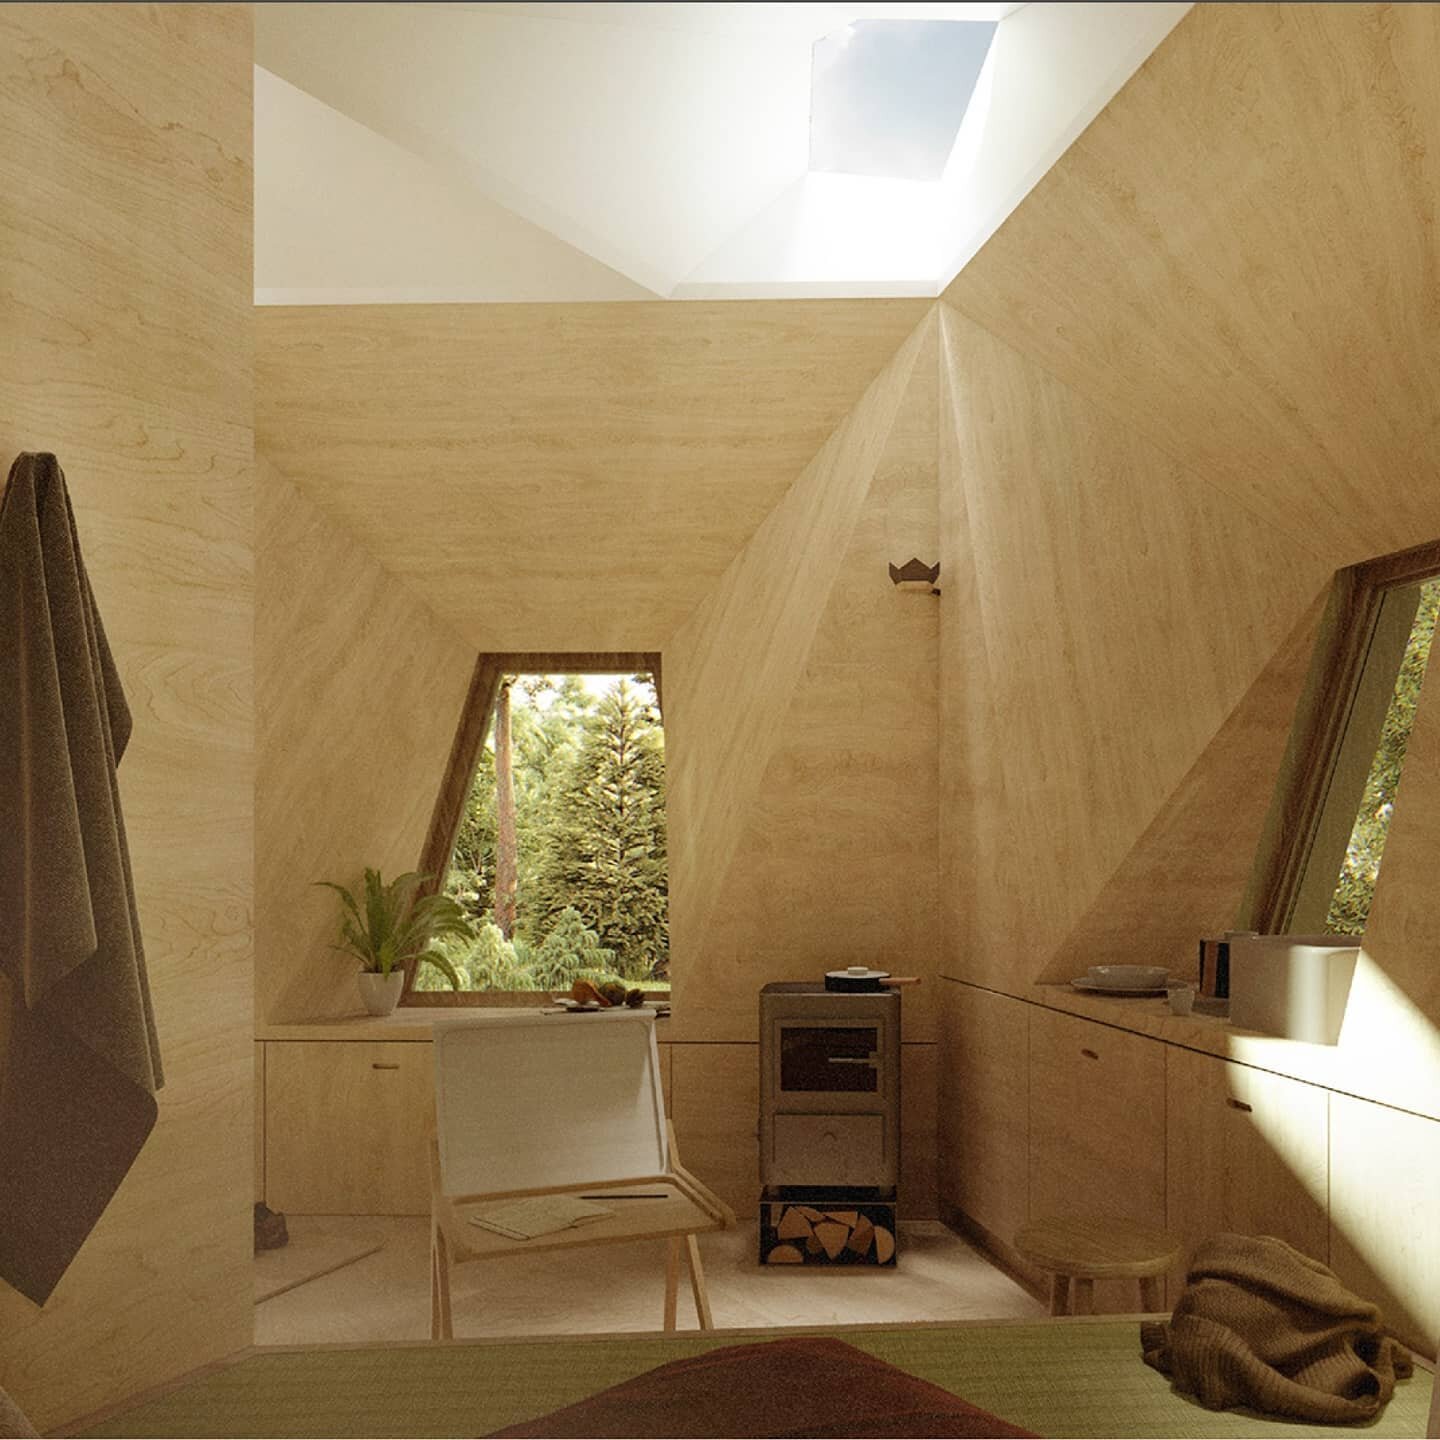 Interior view of &quot;Nur&quot; - a meditation cabin for #vipassana retreats
*
Swipe for elevation, plan and section views as well as the night exterior render
*
Interior all plywood panelling with deep window sills, suitable for perching and gazing